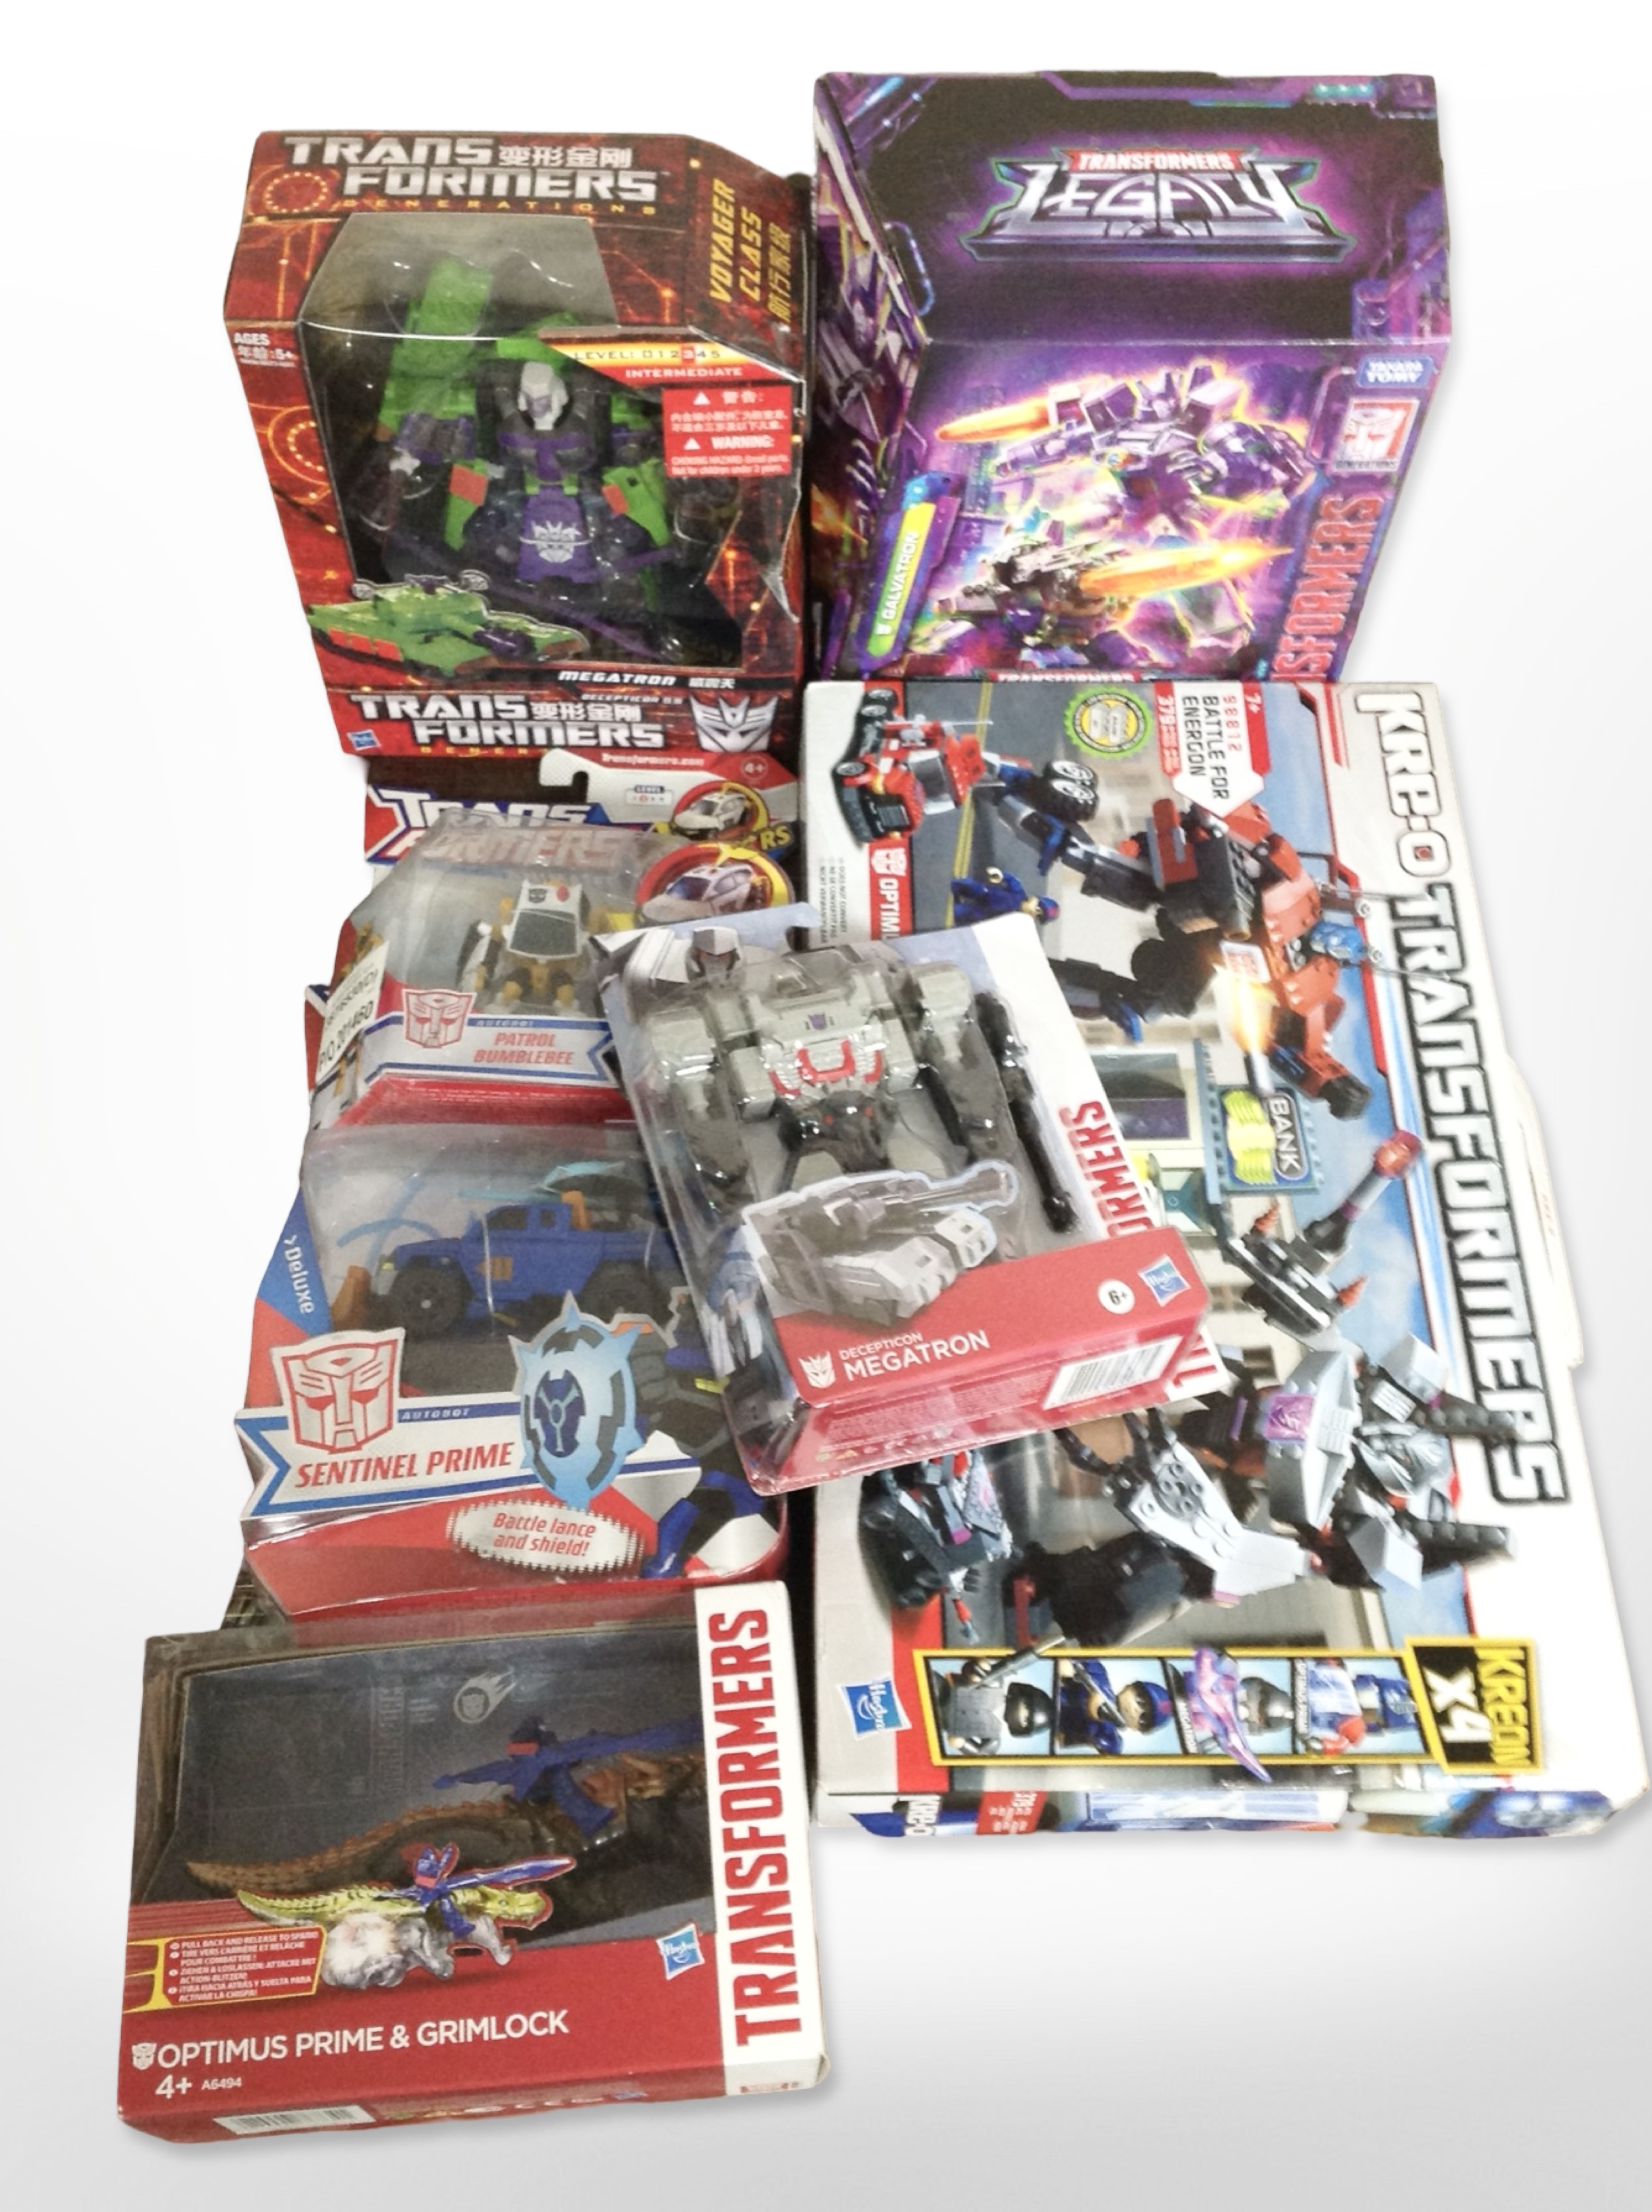 Seven Hasbro and Tomy Transformers figurines, boxed.